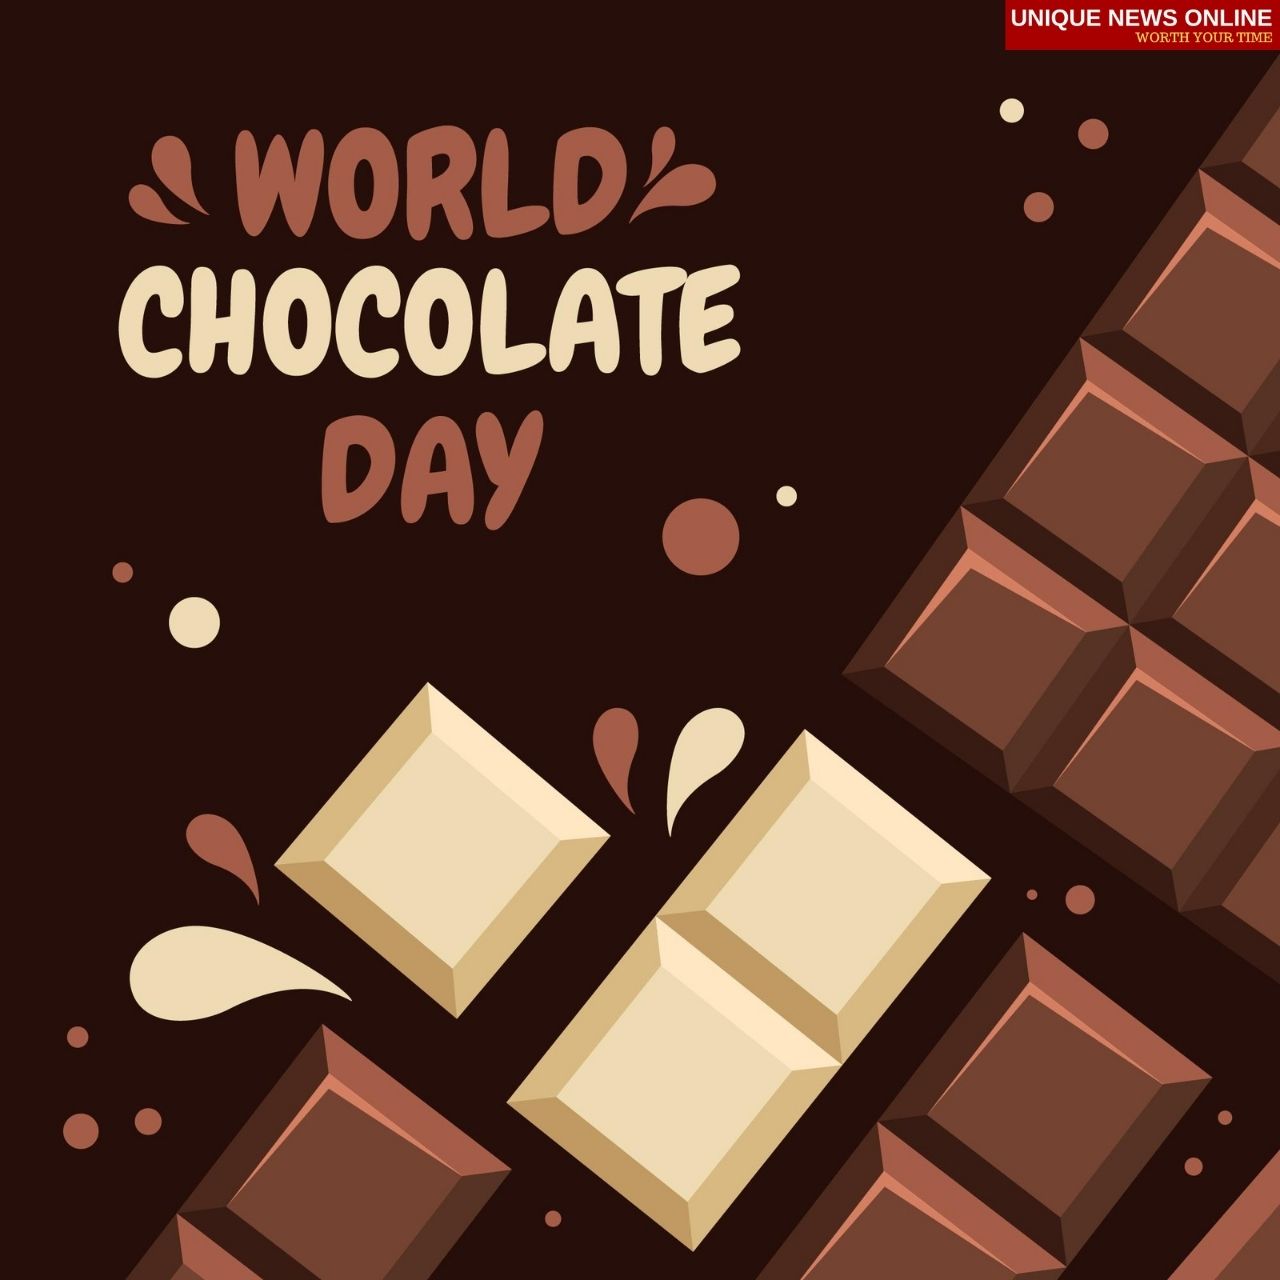 World Chocolate Day 2021: Quotes, Wishes, Images, Greetings, Meme, Poster, Facebook, and Twitter Posts to celebrate chocolate Day